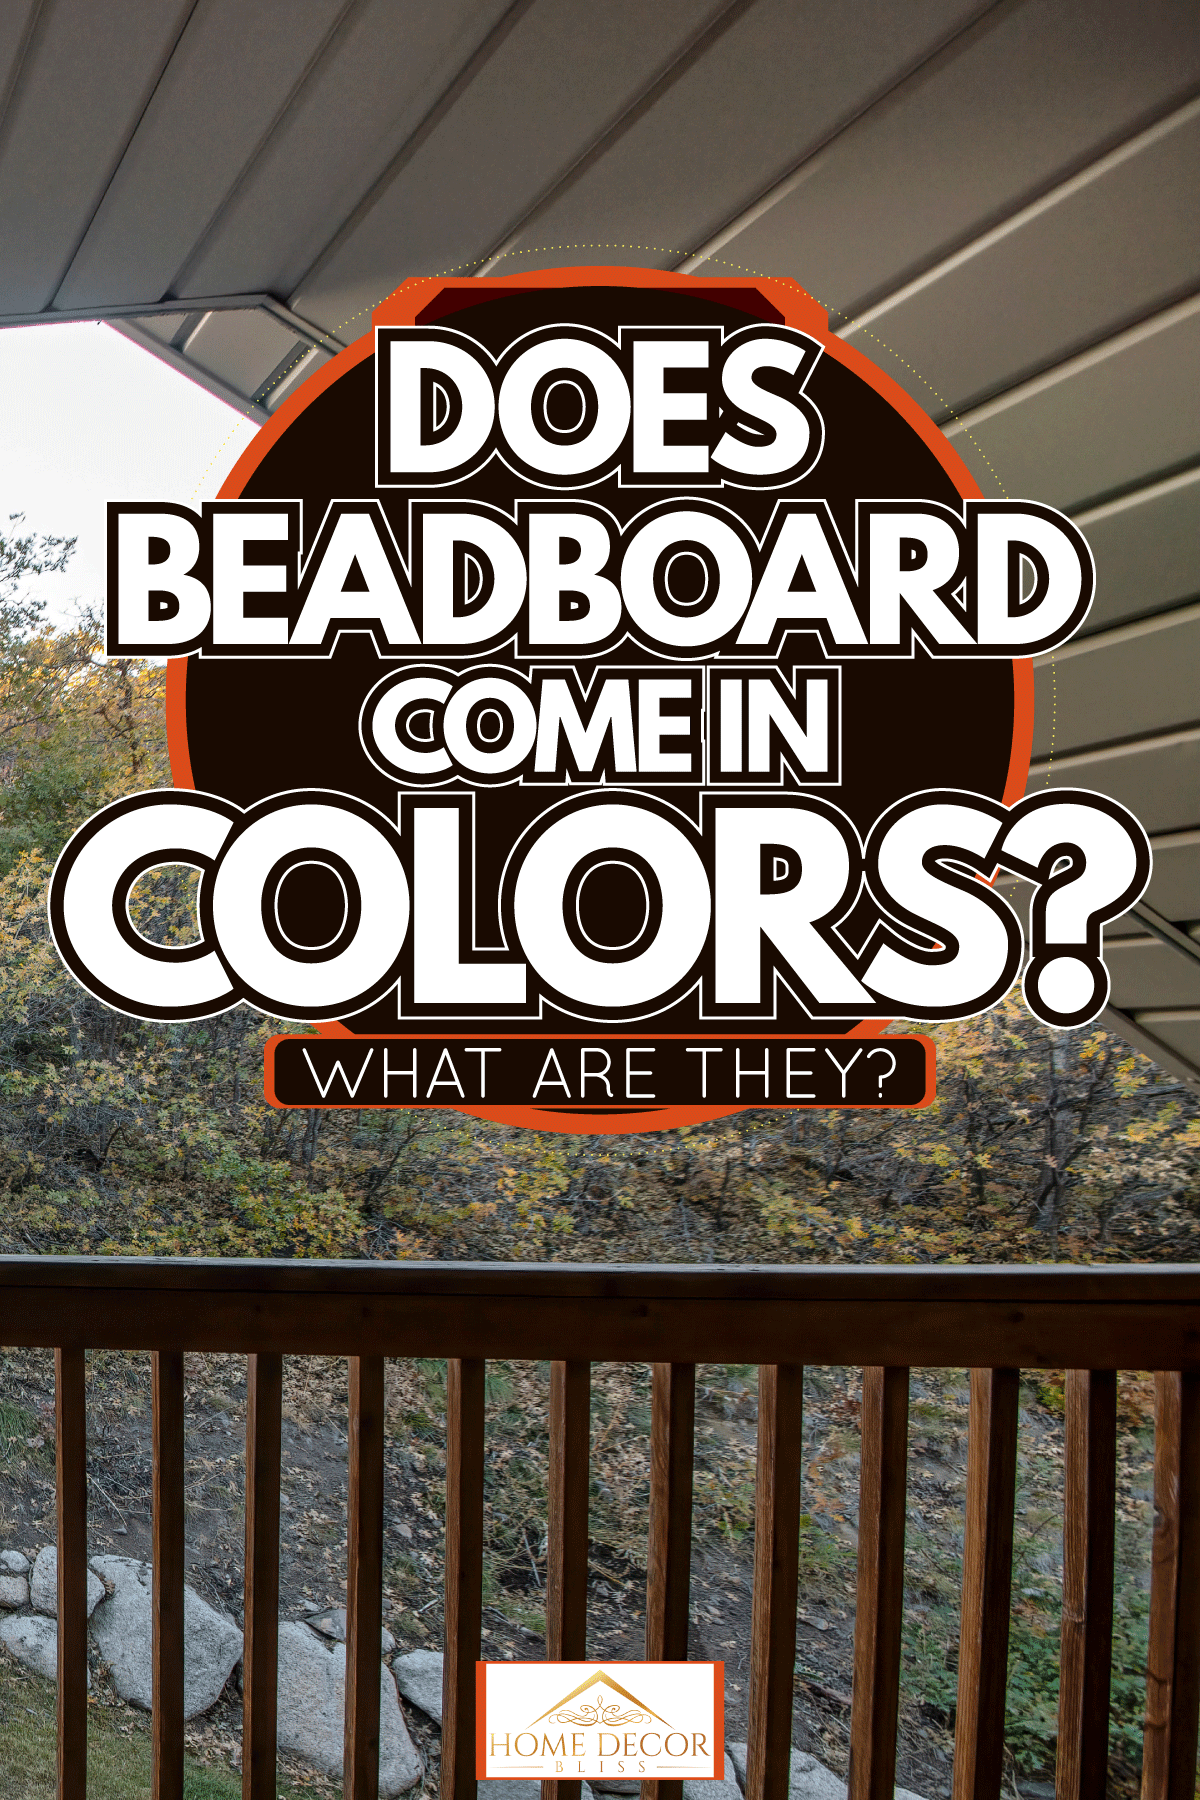 Decorative bed board ceiling, Does beadboard come in colors? and what are they?